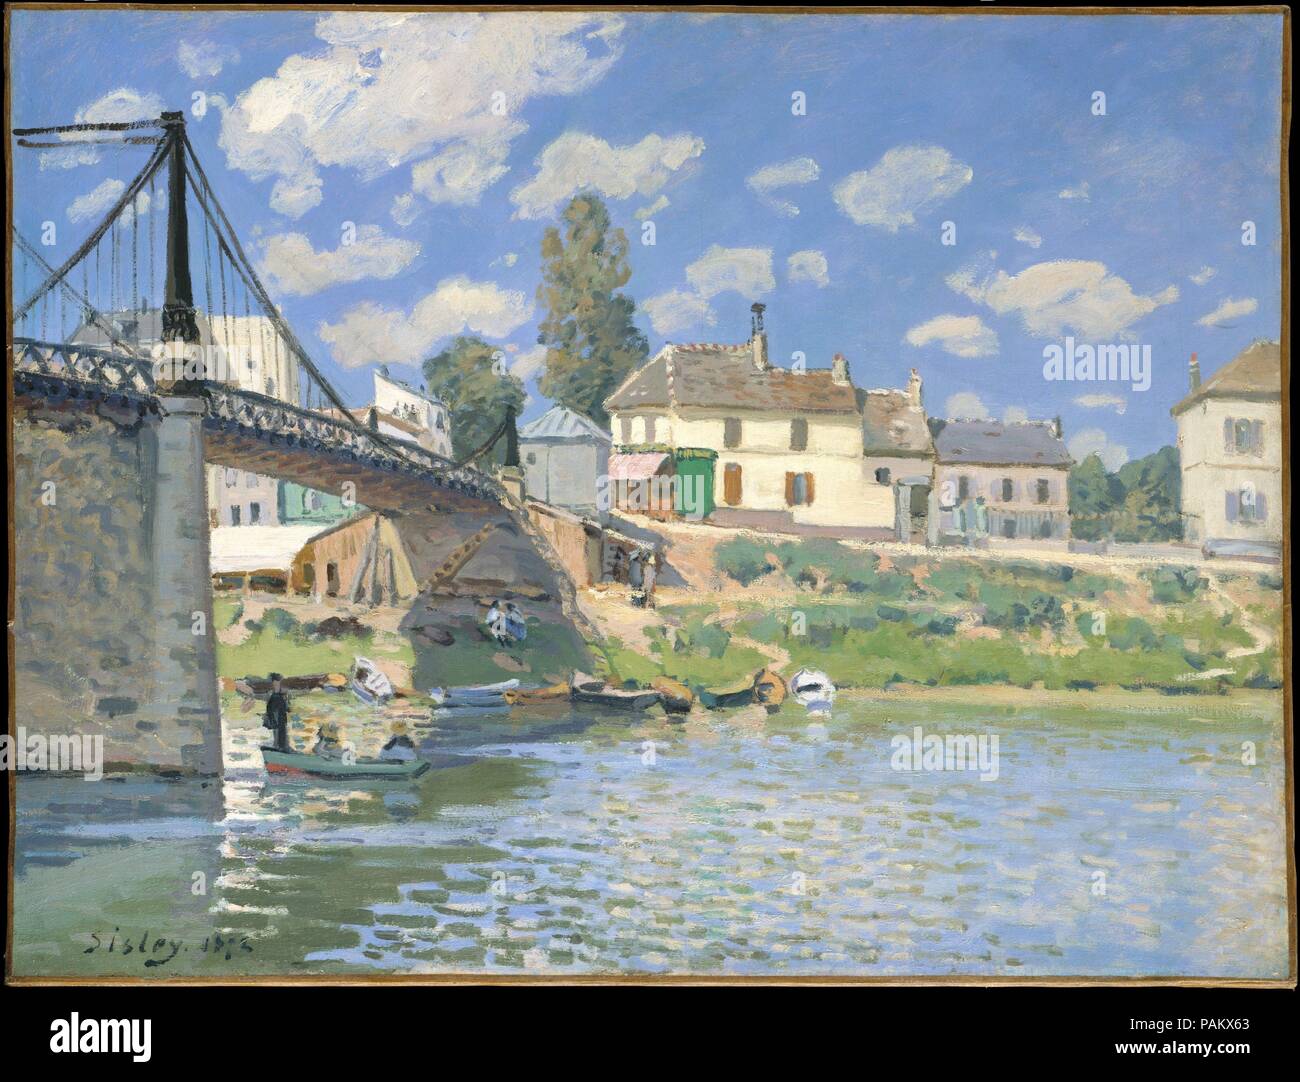 The Bridge at Villeneuve-la-Garenne. Artist: Alfred Sisley (British, Paris 1839-1899 Moret-sur-Loing). Dimensions: 19 1/2 x 25 3/4 in. (49.5 x 65.4 cm). Date: 1872.    Recently built, state-of-the-art bridges, emblematic of modernity, appear in a number of Sisley's paintings of the 1870s and early 1880s. This close-up, dramatically angled view depicts the cast-iron and stone suspension bridge that was constructed in 1844 to connect the village of Villeneuve-la-Garenne with the Paris suburb of Saint-Denis. Sisley enlivened the scene by showing holidaymakers on the Seine and along the riverbank. Stock Photo